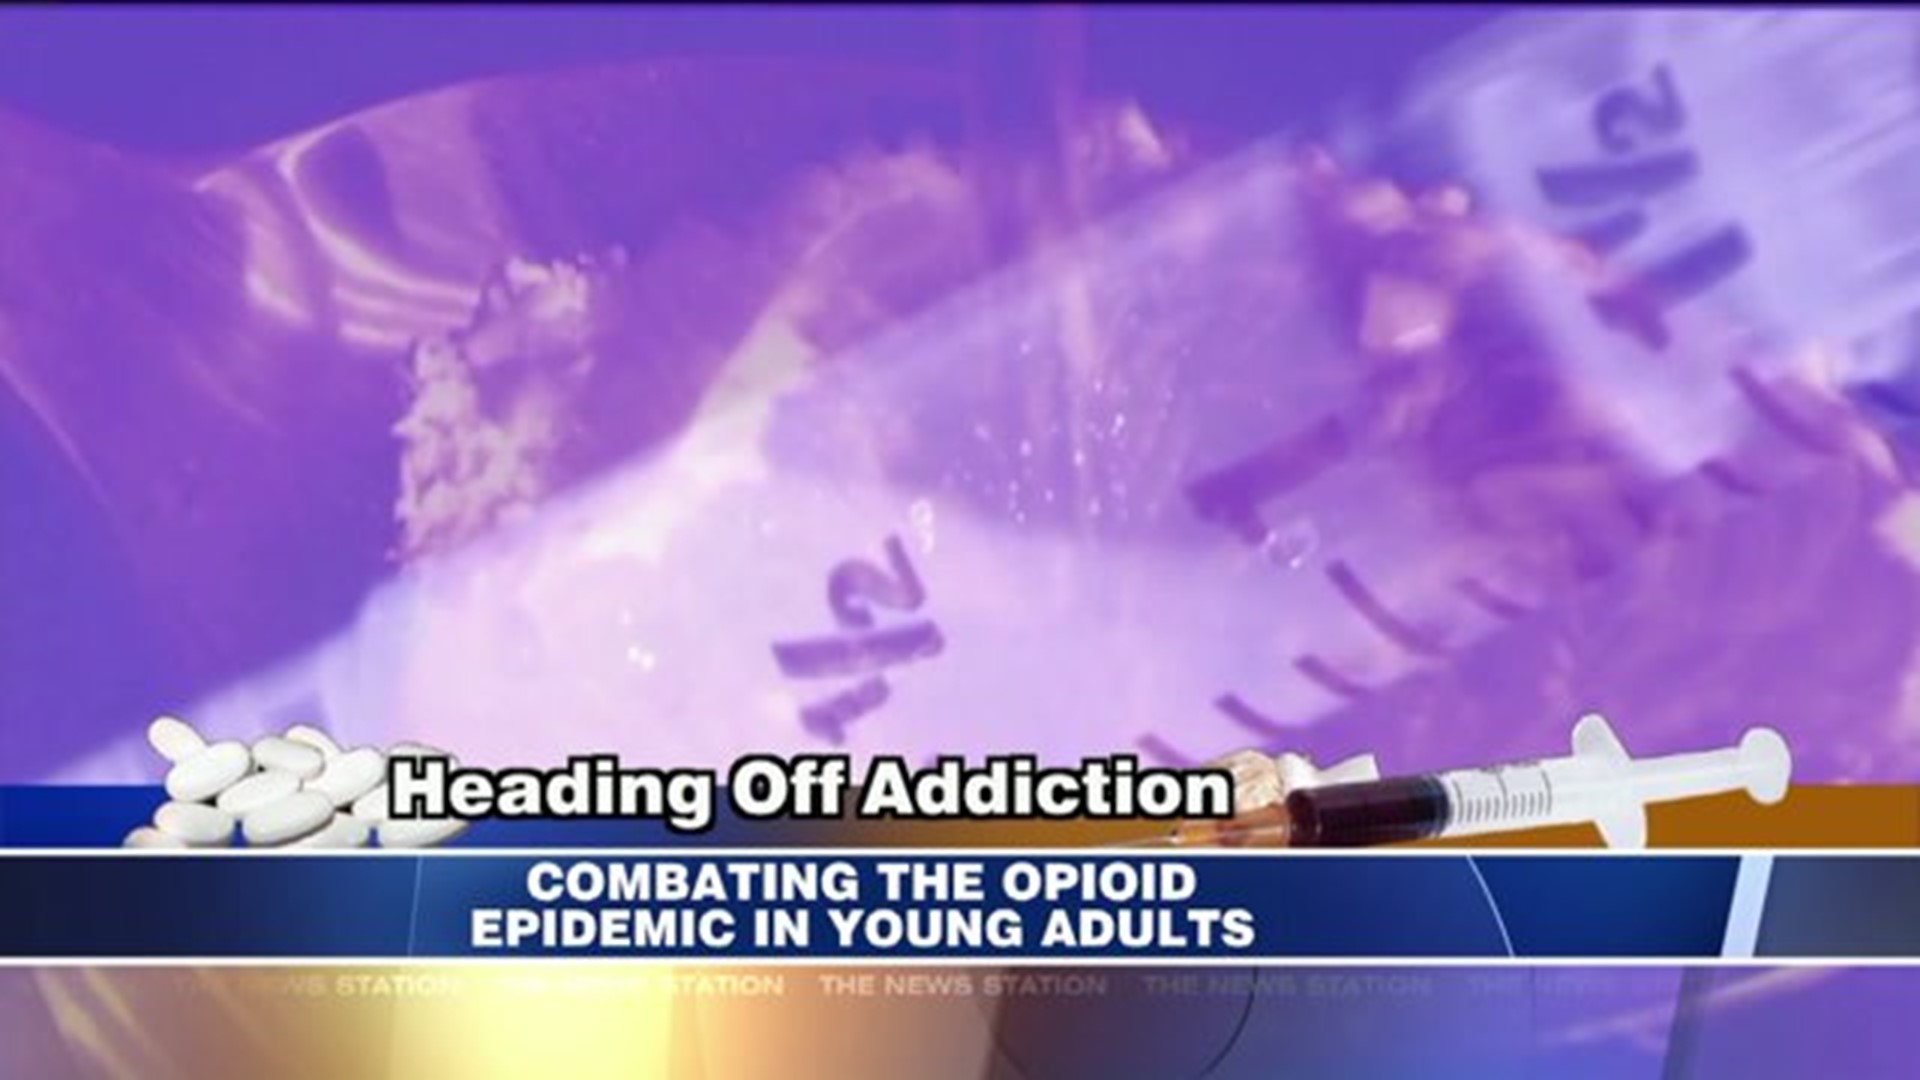 Combating the Opioid Epidemic in Young Adults